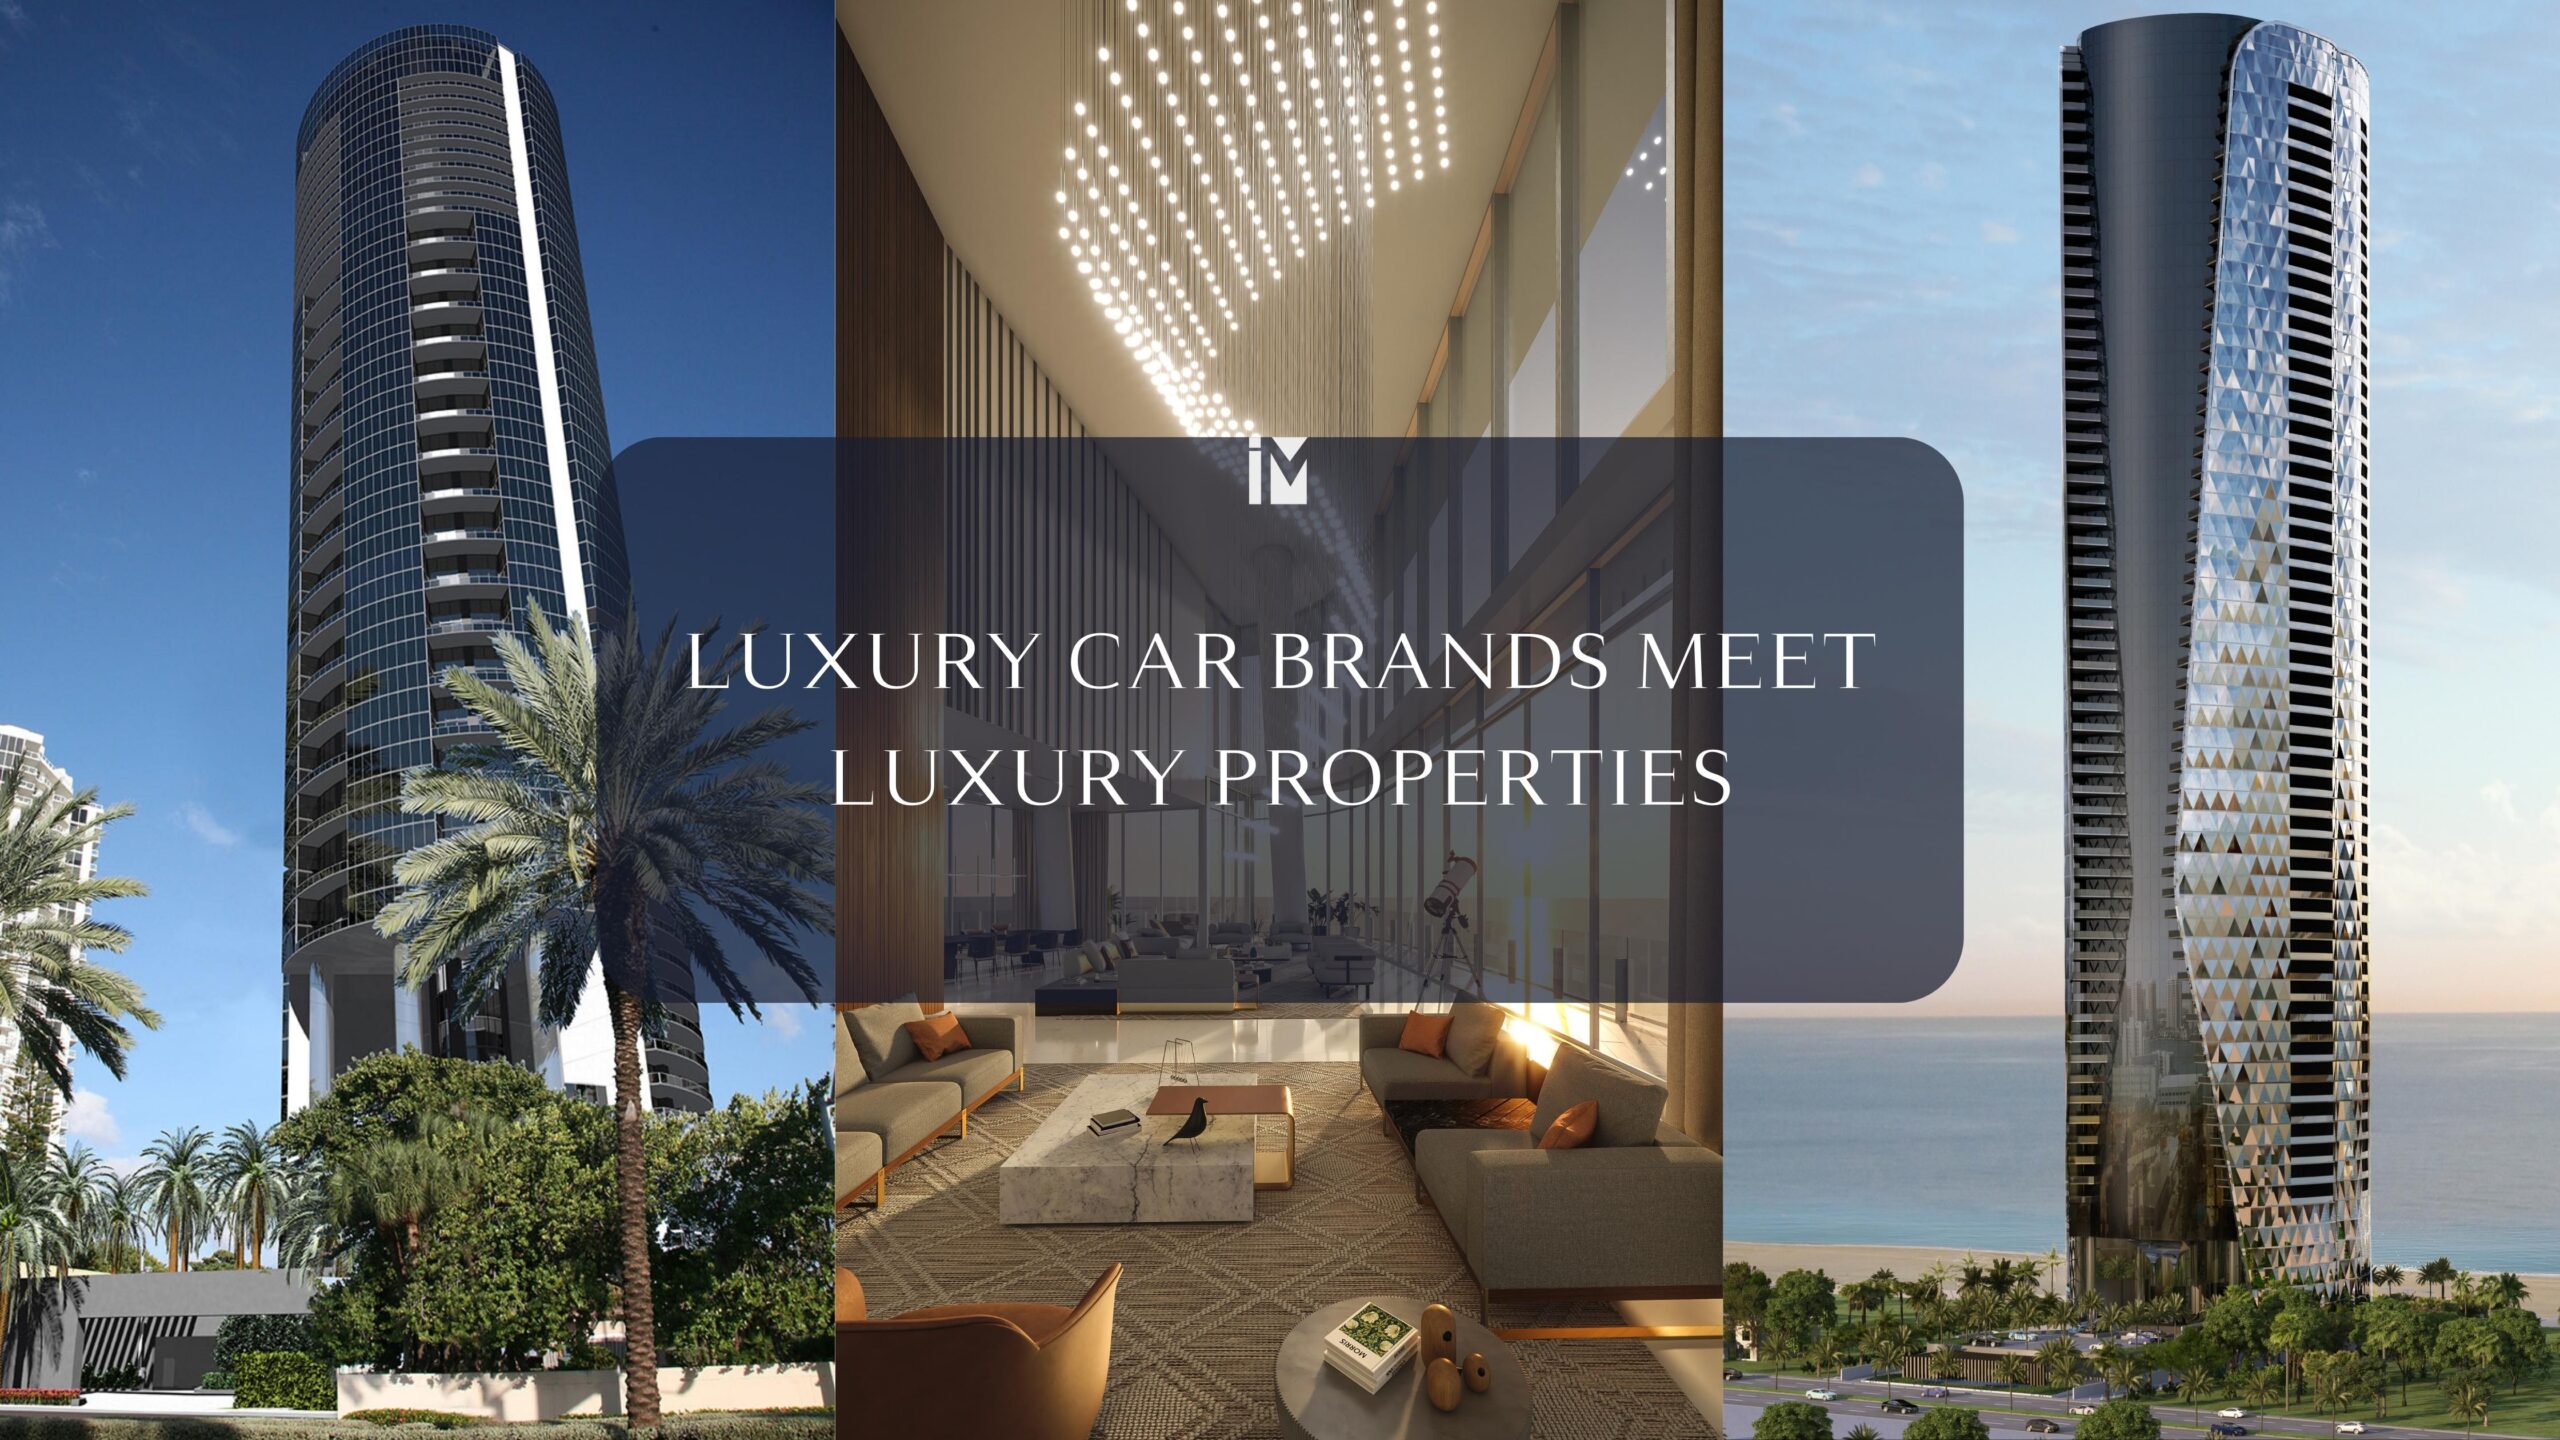 Luxury Car Brands Meet Luxury Buildings: A Glimpse Into Miami’s Most Exclusive Residences